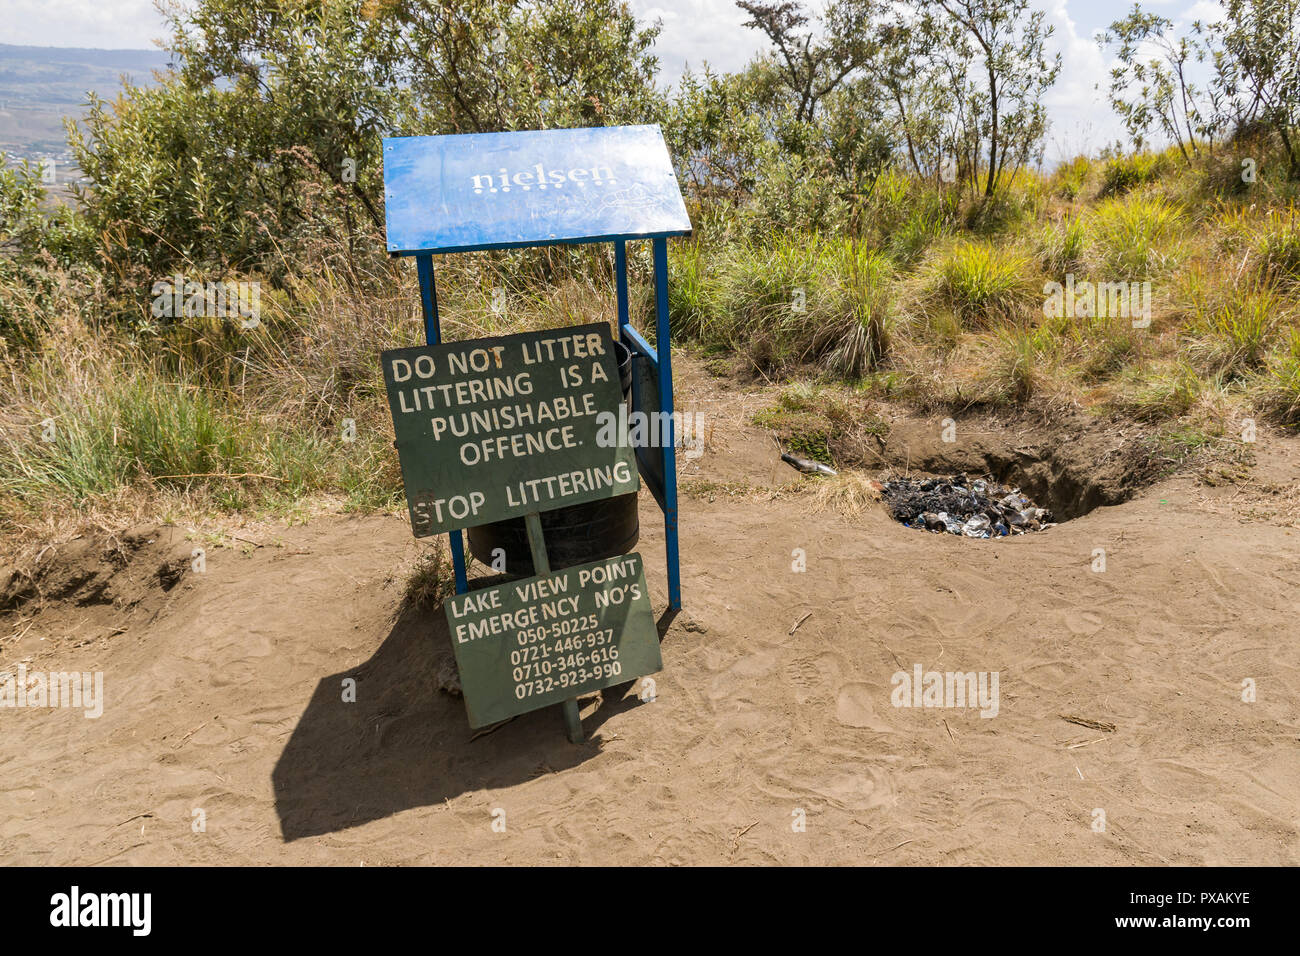 A pile of burnt rubbish lies in a small hole by a rubbish bin with warning sign to not litter on the trail up Mount Longonot, Kenya Stock Photo